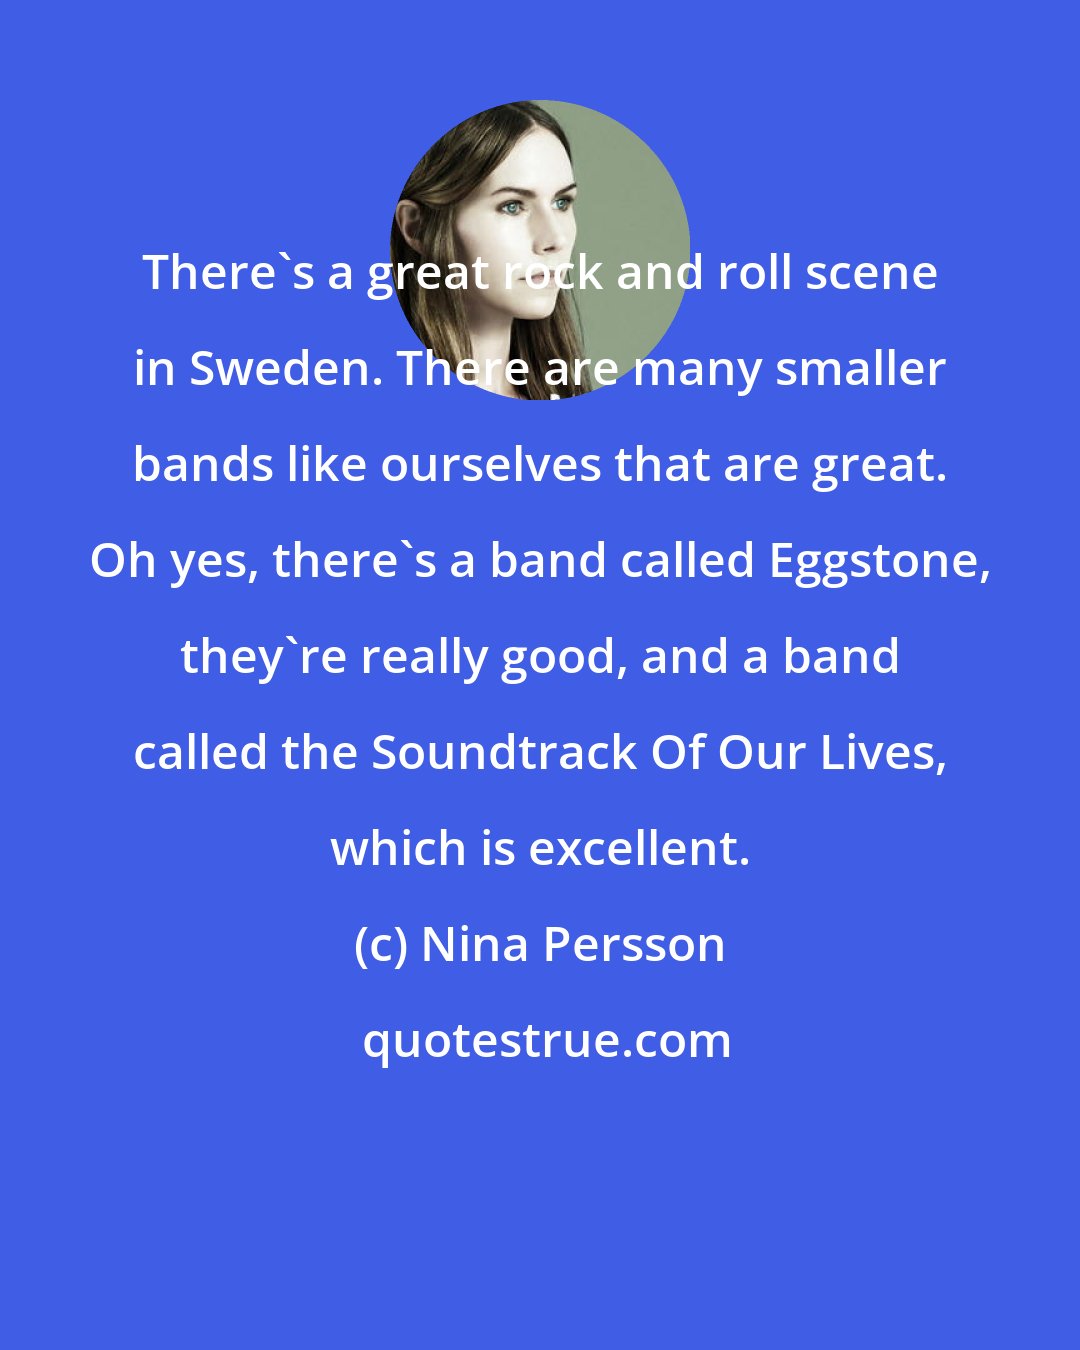 Nina Persson: There's a great rock and roll scene in Sweden. There are many smaller bands like ourselves that are great. Oh yes, there's a band called Eggstone, they're really good, and a band called the Soundtrack Of Our Lives, which is excellent.